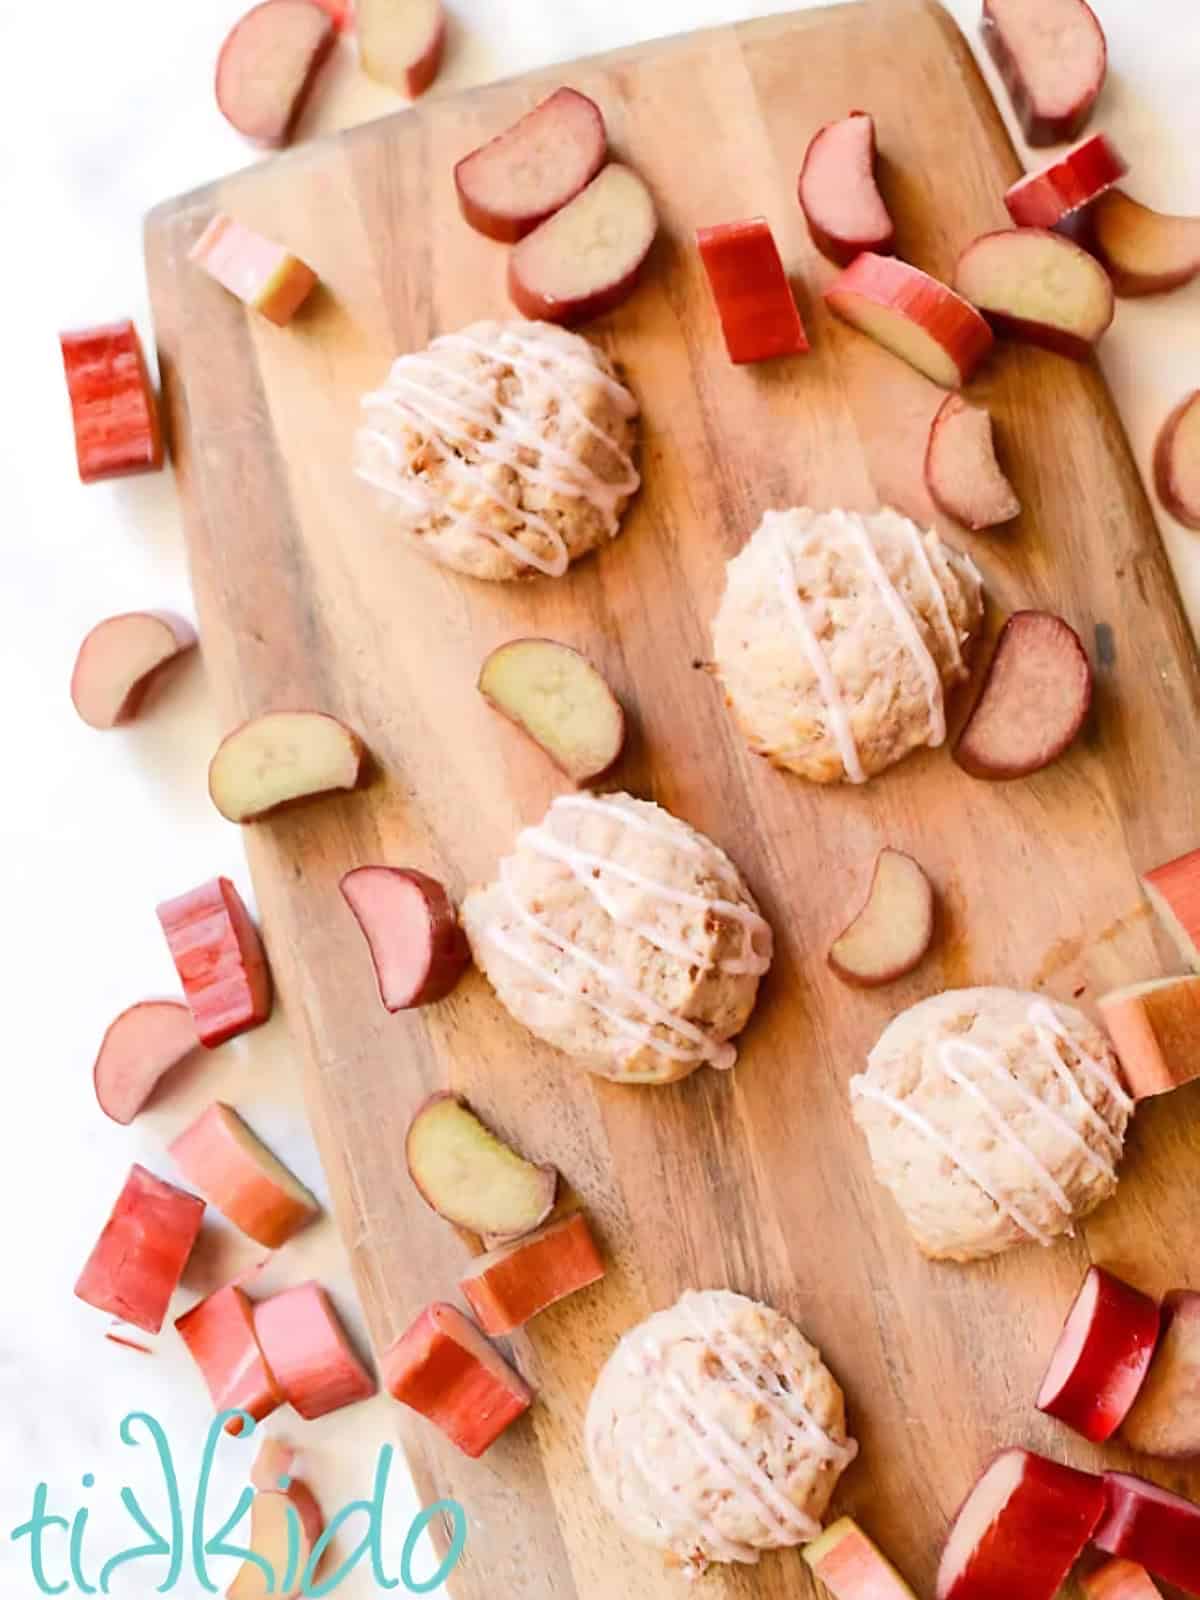 Rhubarb cookies on a wooden board next to slices of rhubarb.